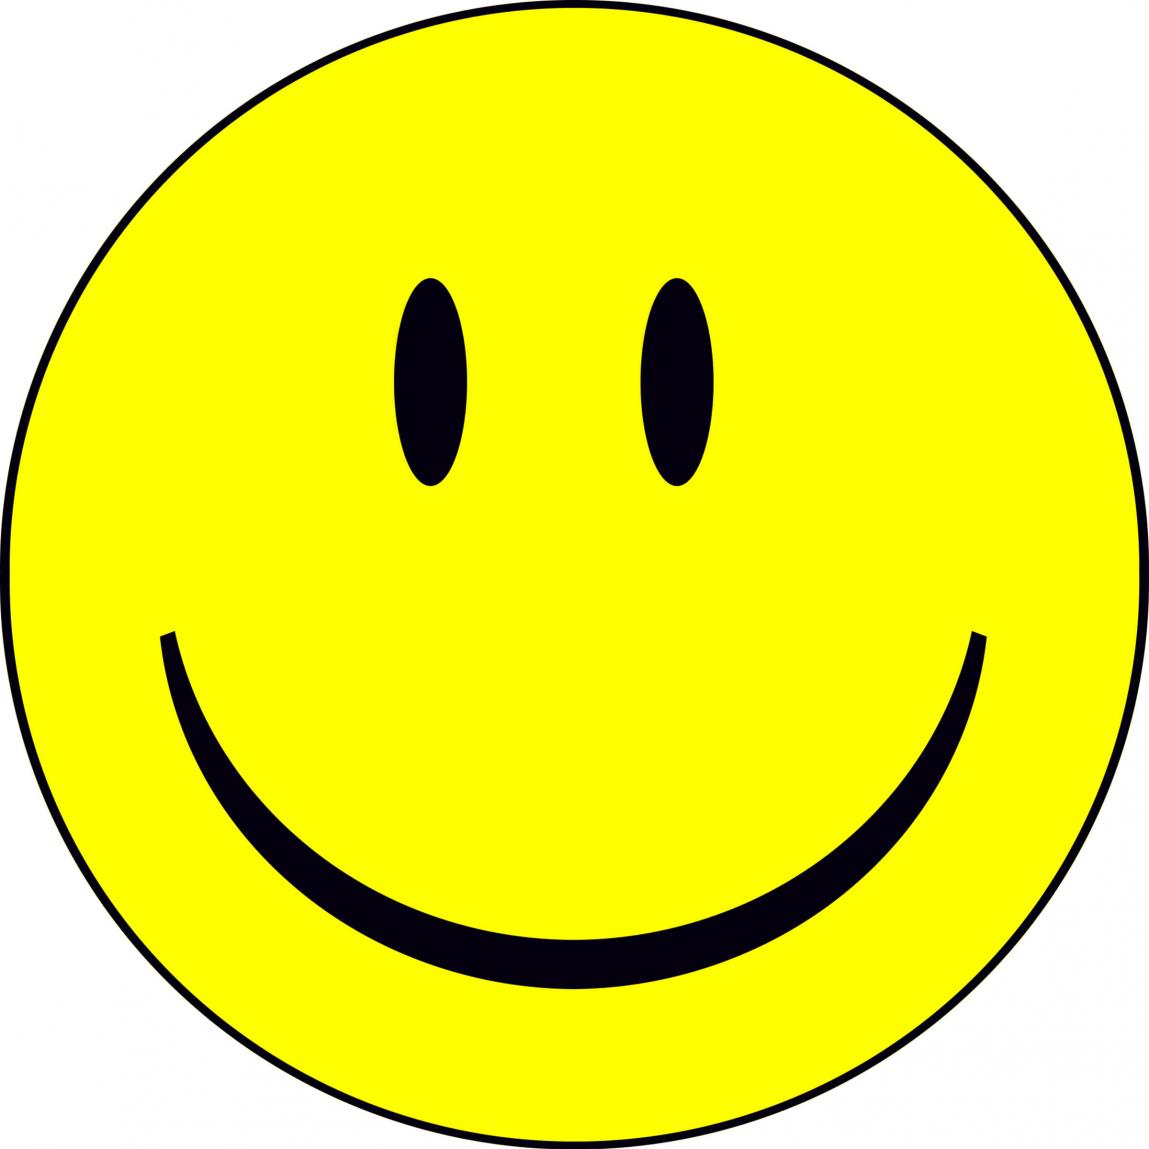 Animated Smiley Faces - ClipArt Best - ClipArt Best